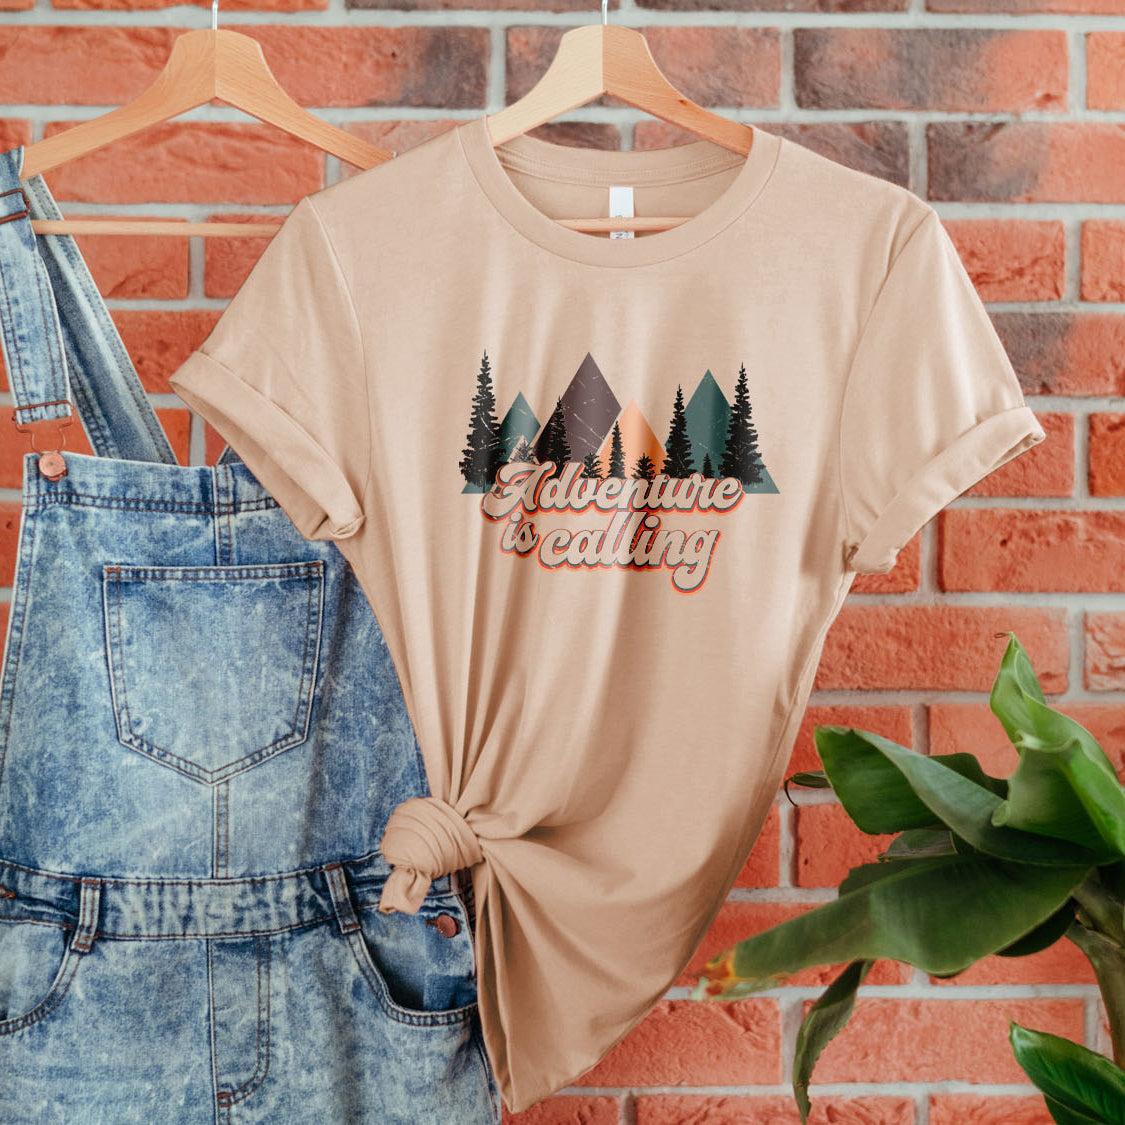 Mountains & Forest Adventure Is Calling T-shirt - Outdoor Nature Camping Retro Vintage Design Printed Tee Shirt